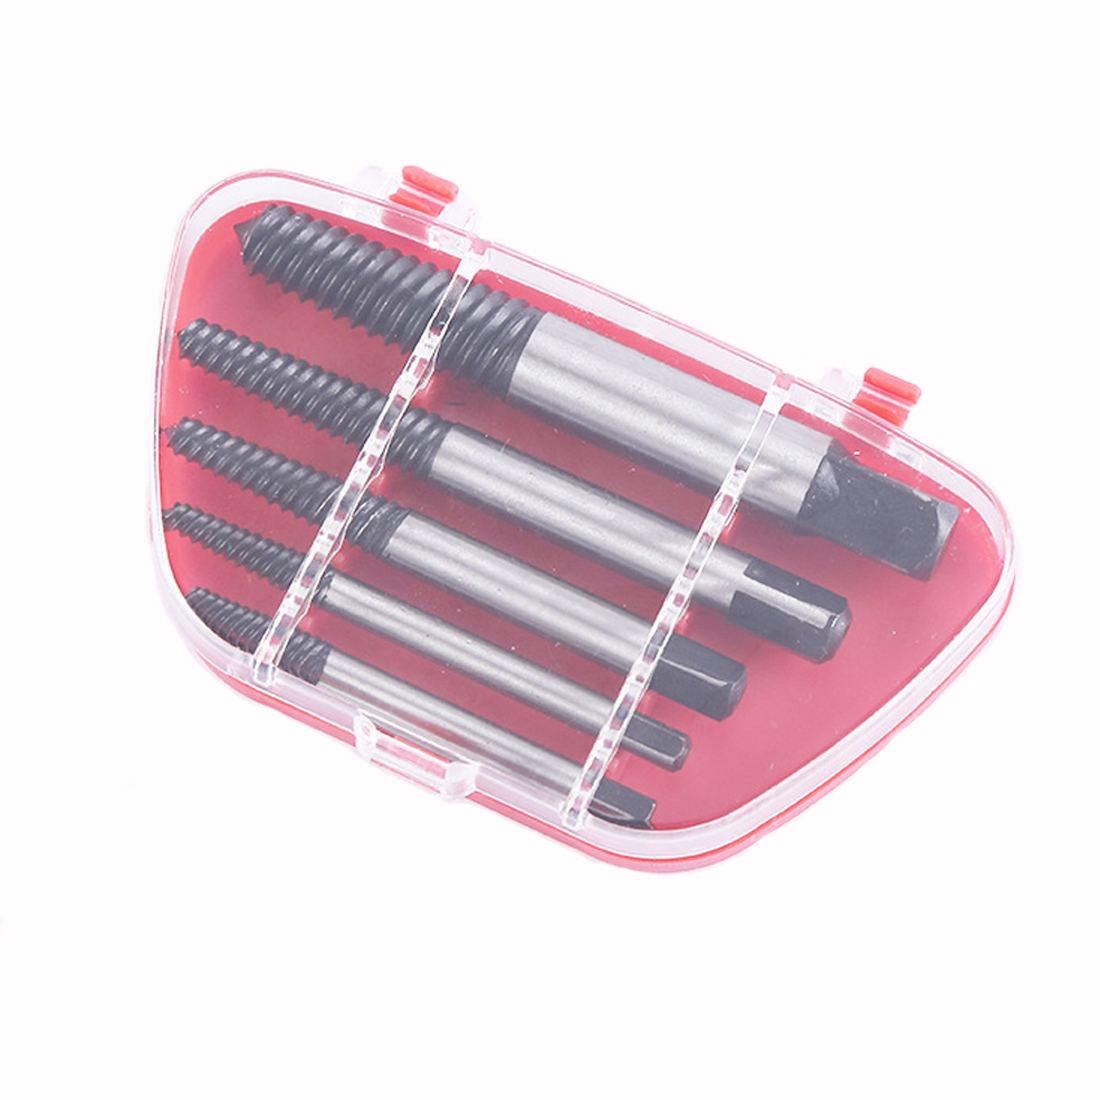 5pcs/6pcs Screw Extractors Damaged Broken Screws Removal Tool Used in Removing the Damaged Bolts Drill Bits With Case